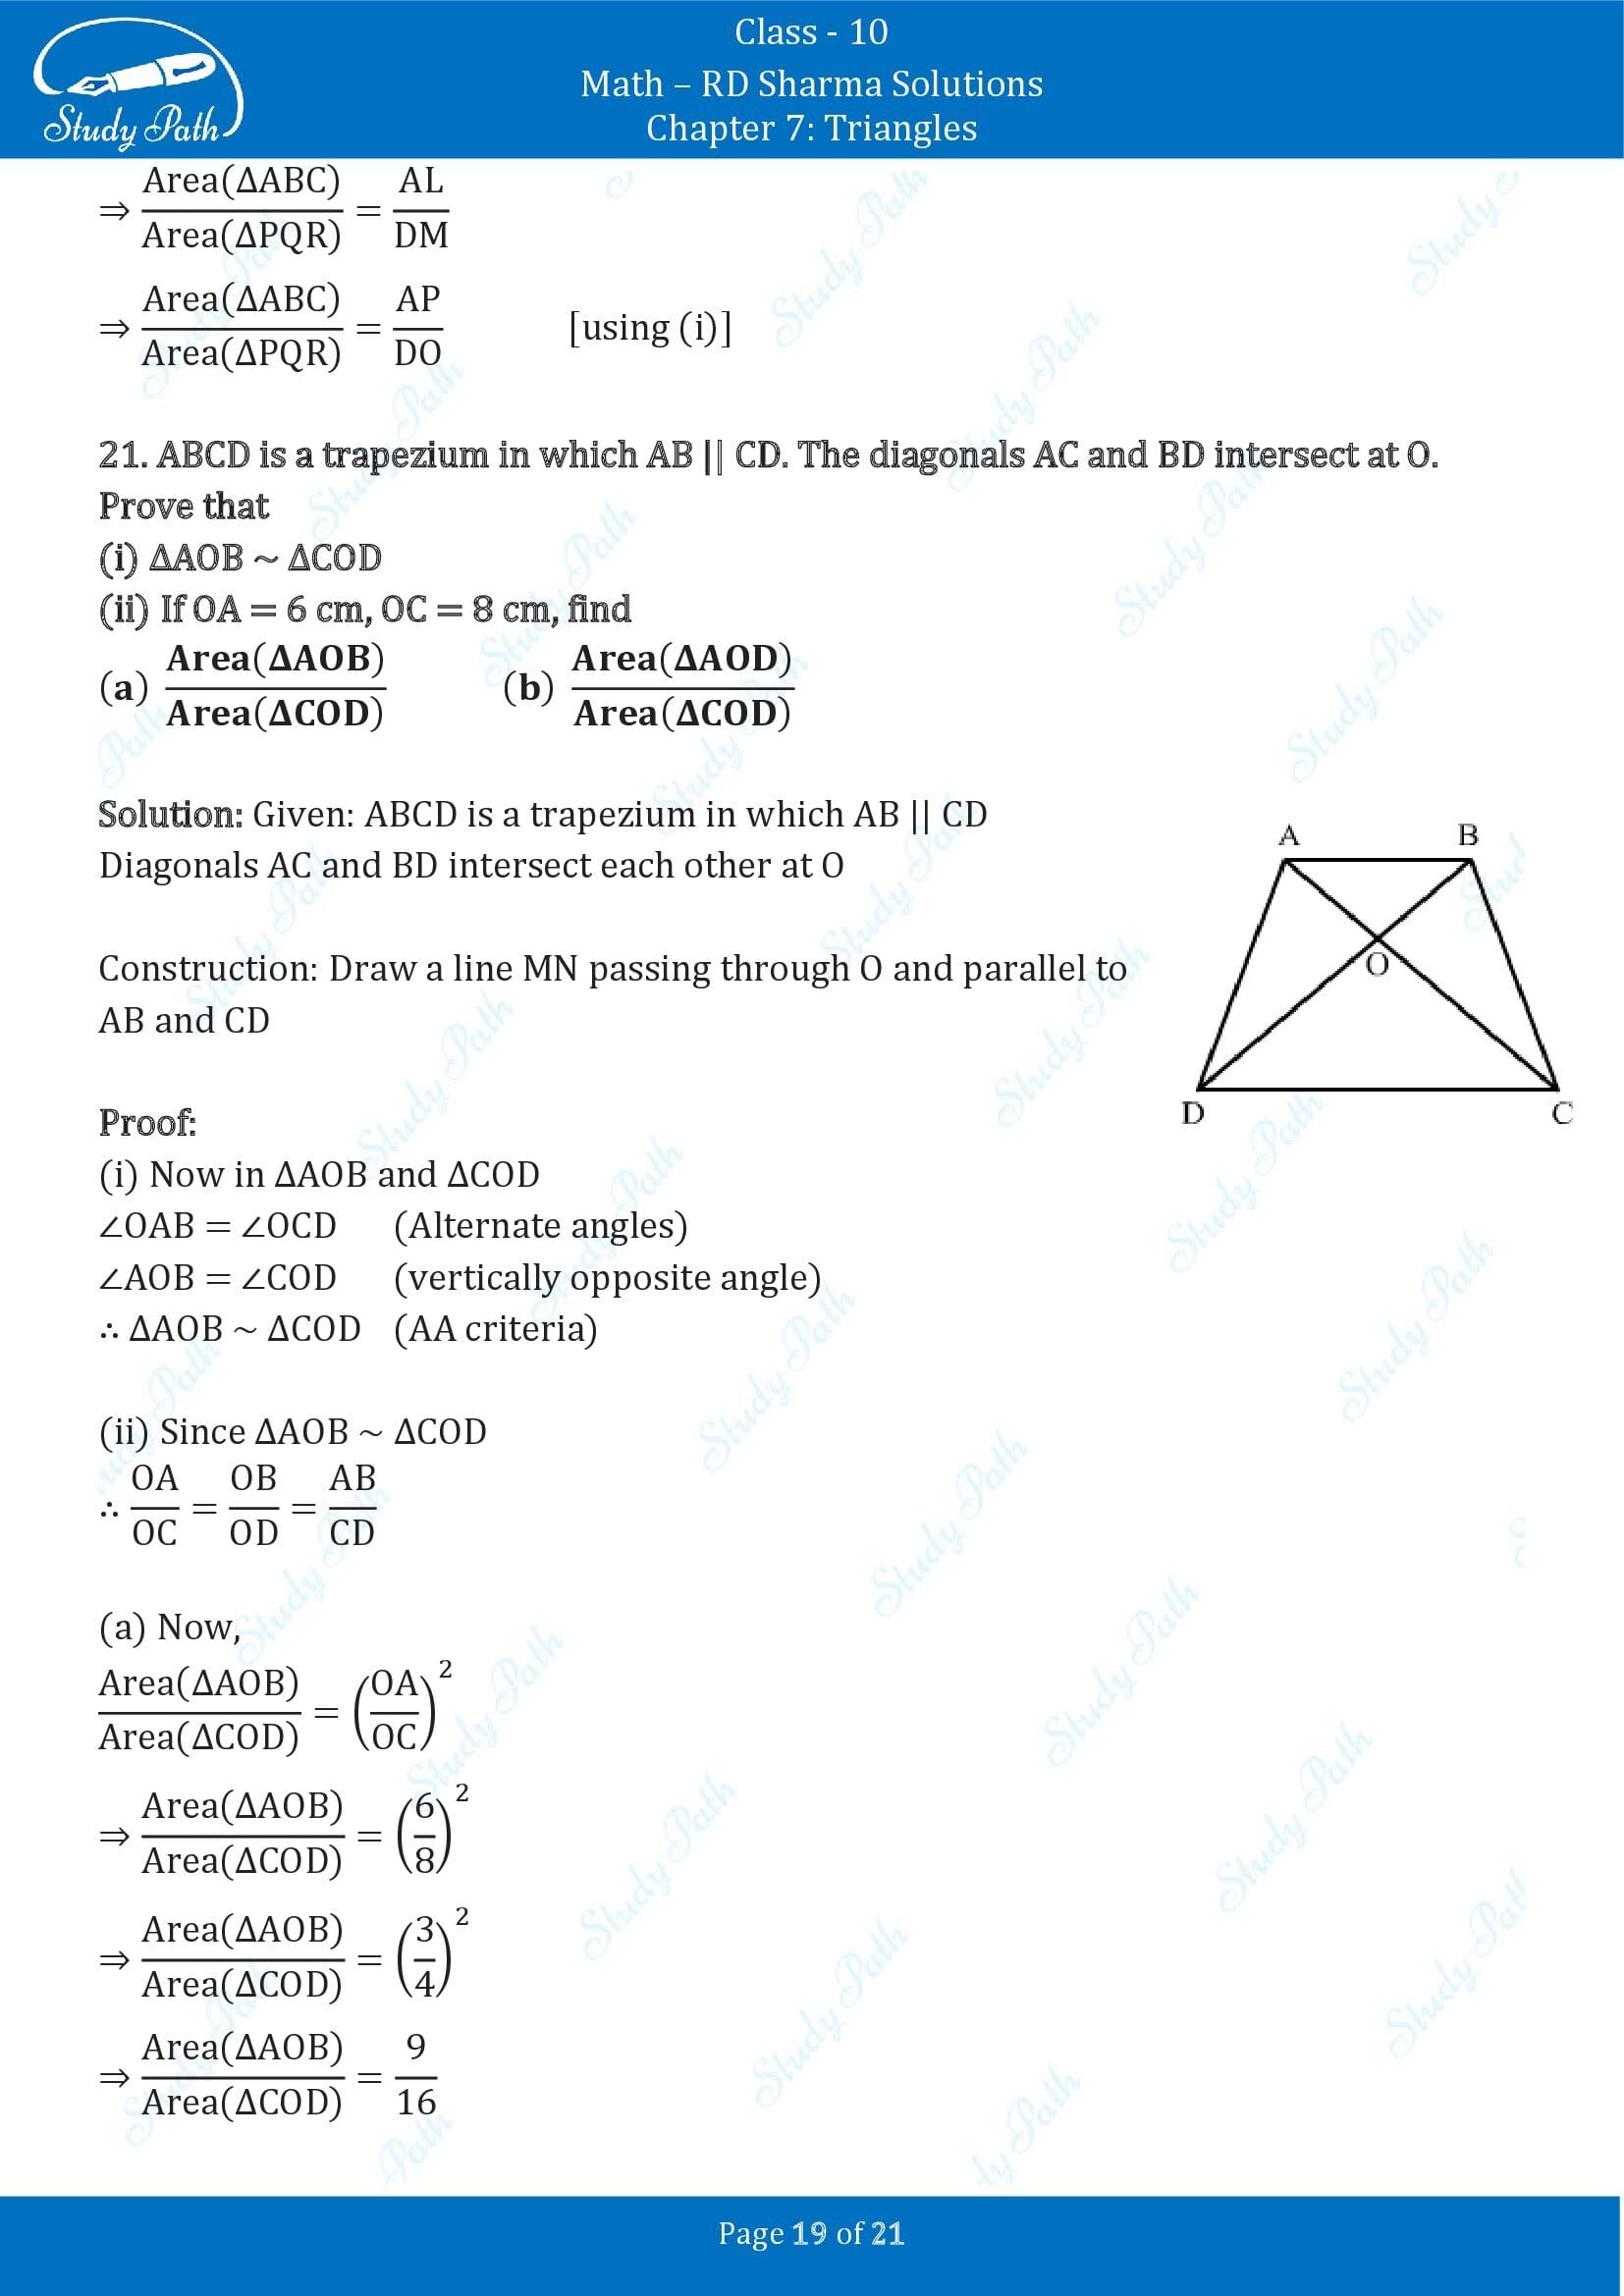 RD Sharma Solutions Class 10 Chapter 7 Triangles Exercise 7.6 00019